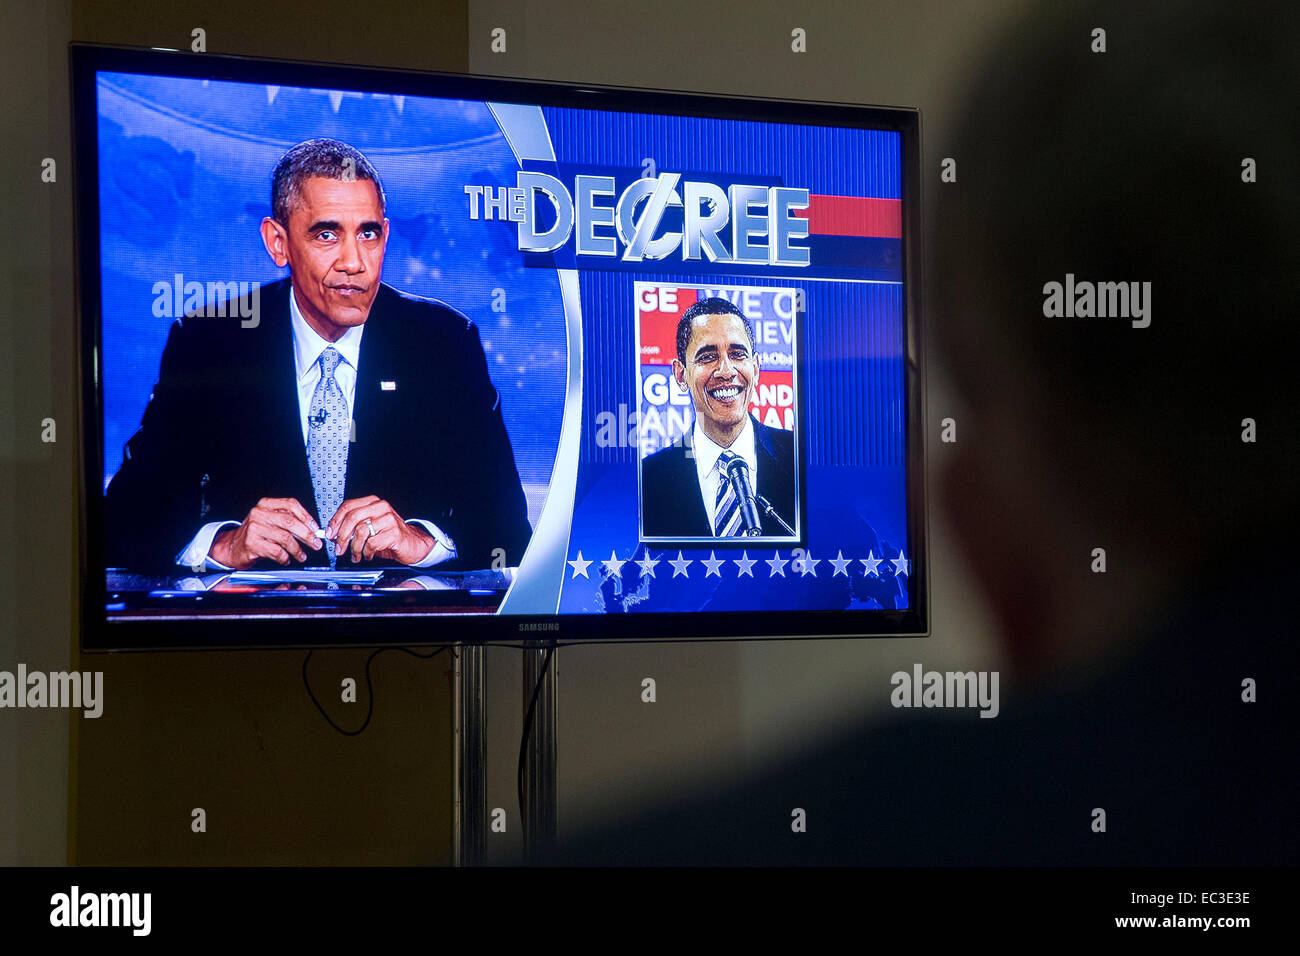 Washington, DC, USA. 8th Dec, 2014. United States President Barack Obama is seen on a television screen as he guest hosts during a taping of Comedy Central's 'The Colbert Report' in Lisner Auditorium on the campus of George Washington University in Washington, DC, U.S., on Monday, December 8, 2014. This is President Obama's third appearance on 'The Colbert Report' that will broadcast its final show on December 18, 2014. Credit:  dpa picture alliance/Alamy Live News Stock Photo